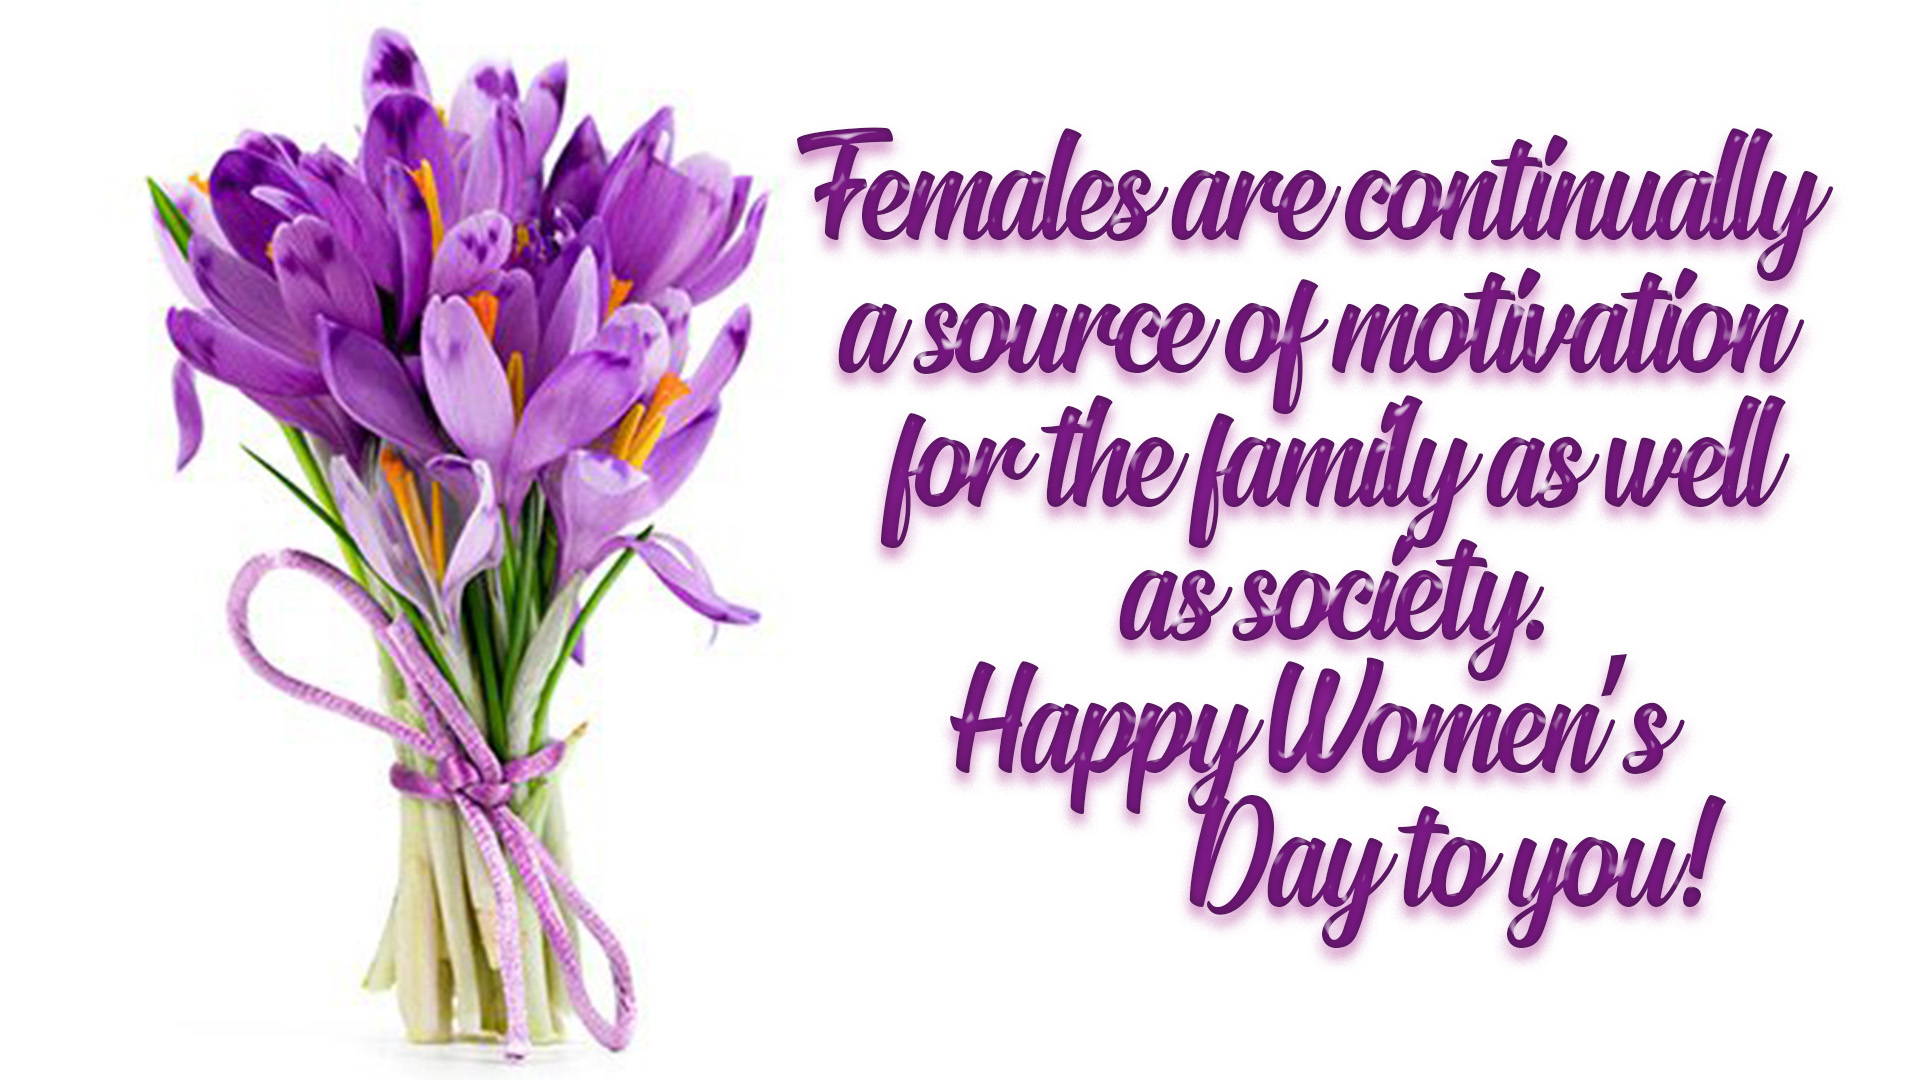 happy womens day wishes and quotes image